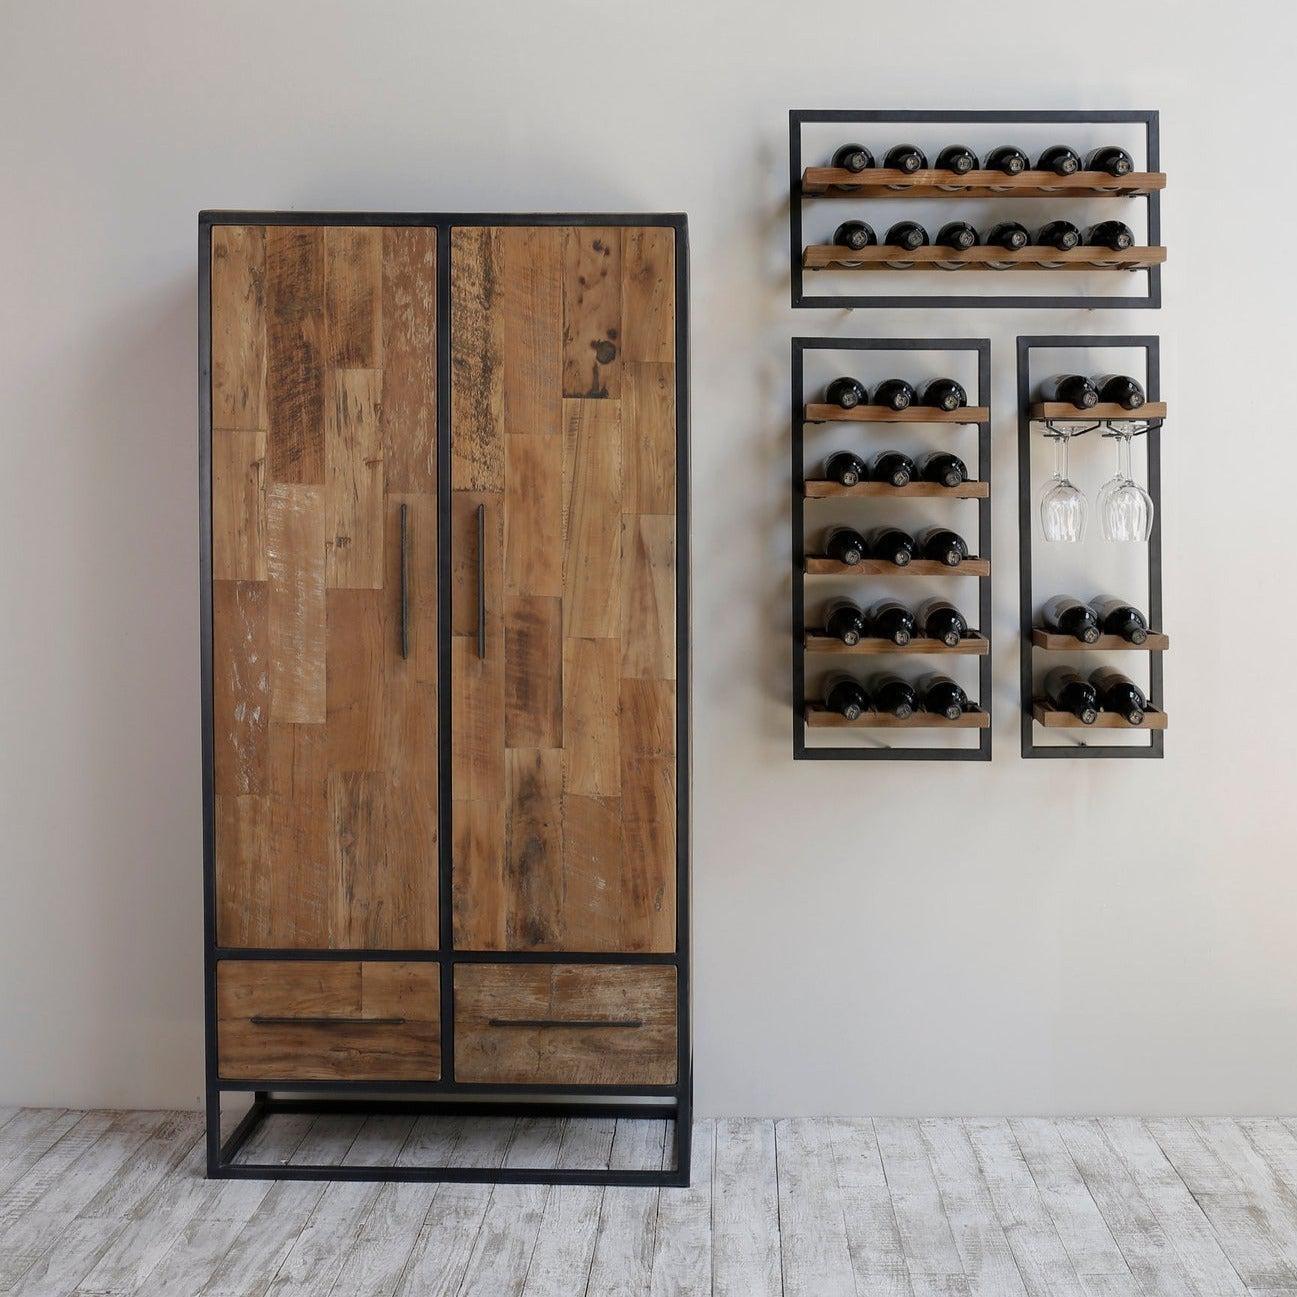 Reclaimed Wood Rustic 12 Bottles Wine Rack With Glass Holder Wall Shelf Mix and Match - Sideboards and Things Brand_LH Imports, Features_Repurposed Materials, Finish_Natural, Finish_Rustic, Game Room, Materials_Reclaimed Wood, Materials_Wood, Product Type_Bar Cart